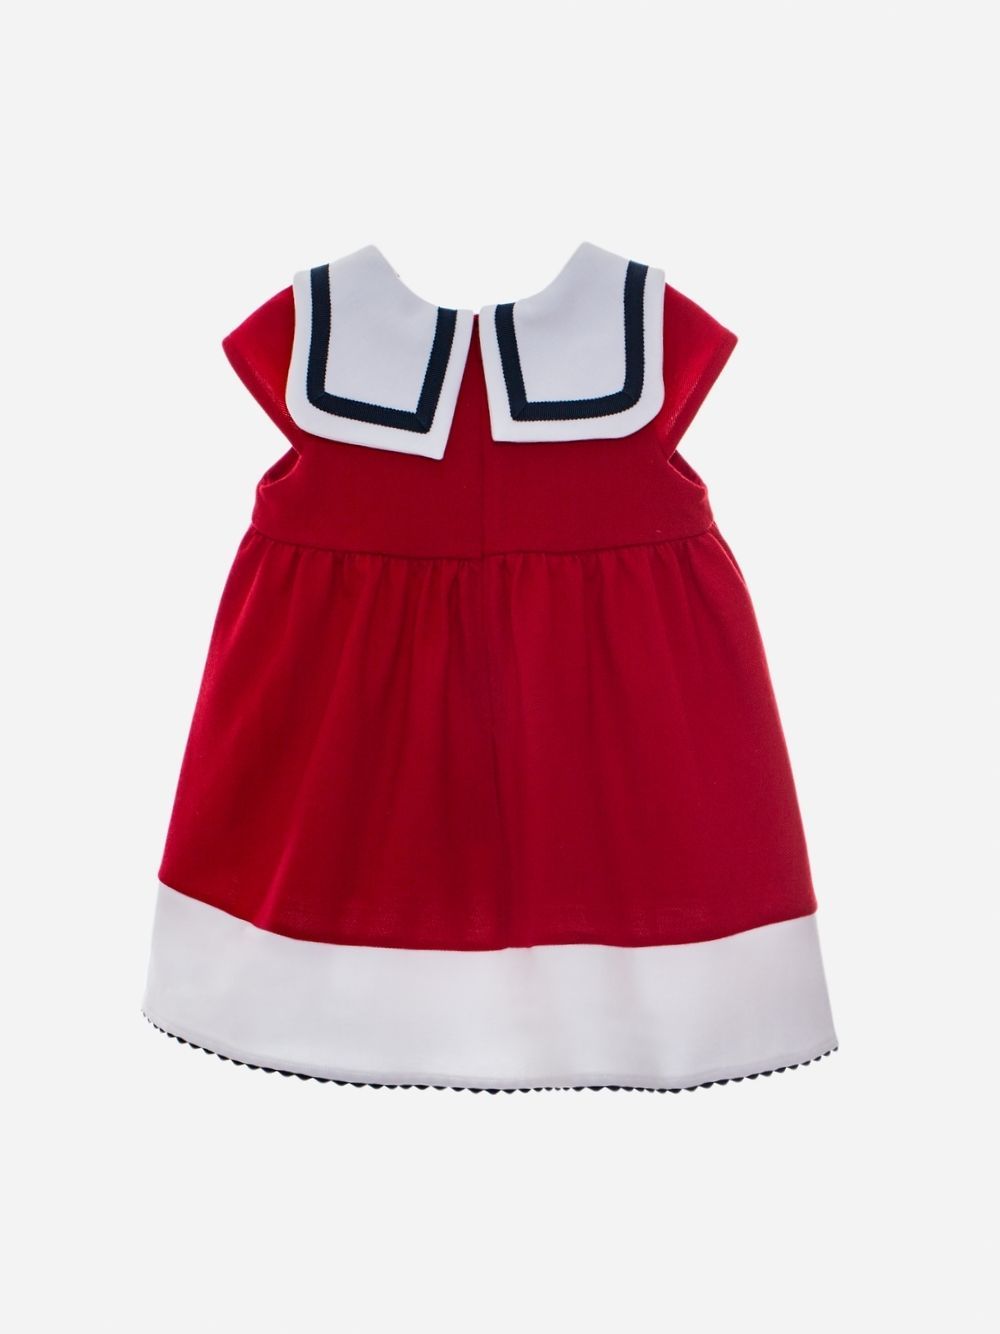 Girls Red Dress with Bow